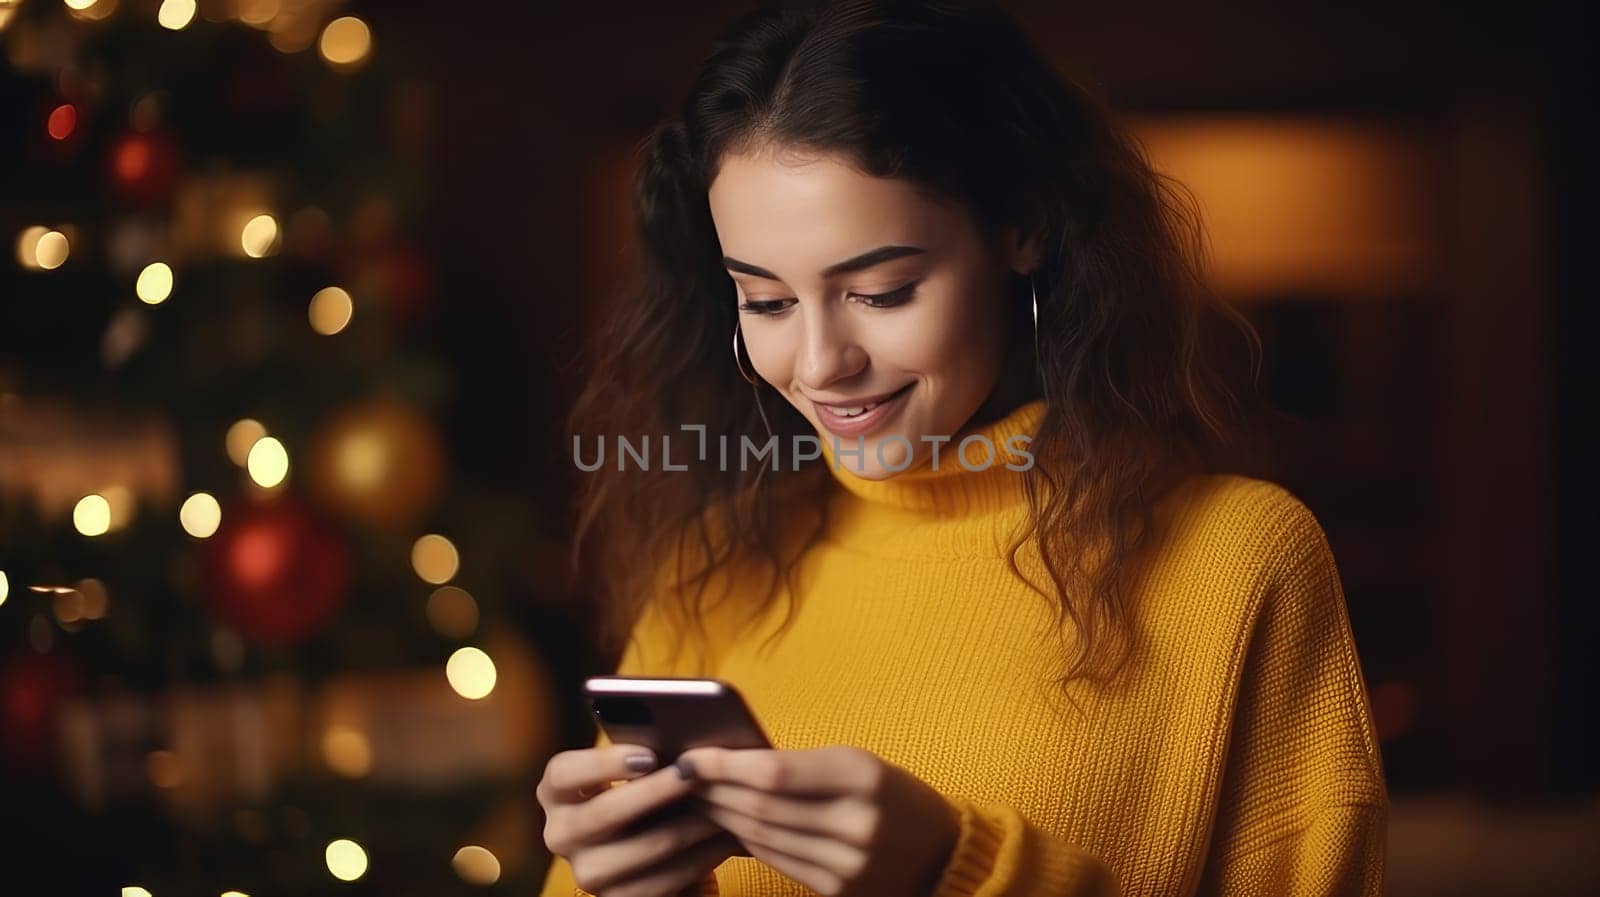 Young woman in yellow sweater orders New Year gifts during Christmas holidays at home using smartphone and credit card by Alla_Yurtayeva